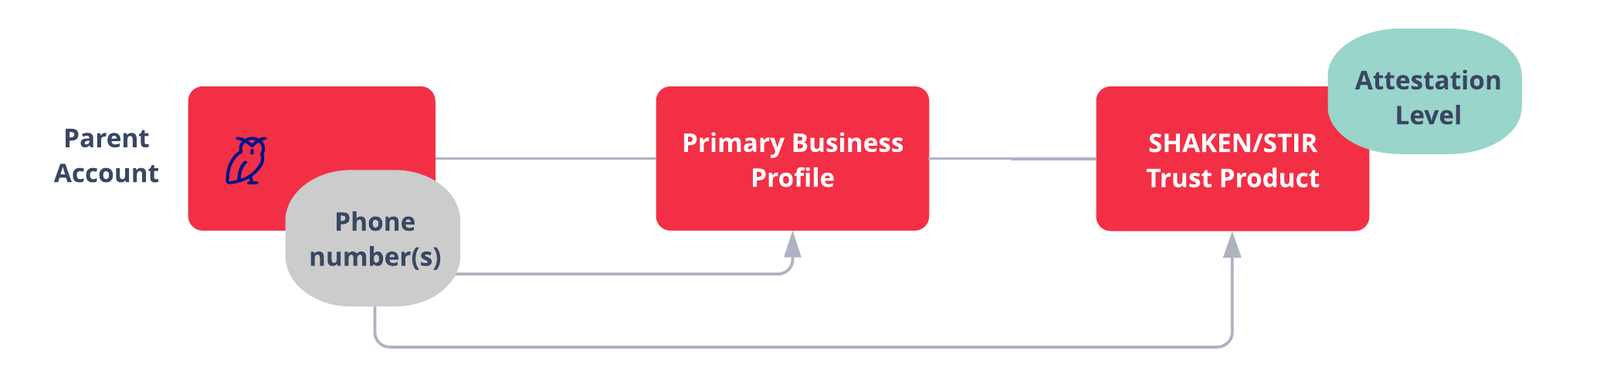 Create a Primary Business Profile under your Parent Account. Add Phone Numbers from Subaccounts to the Business Profile.